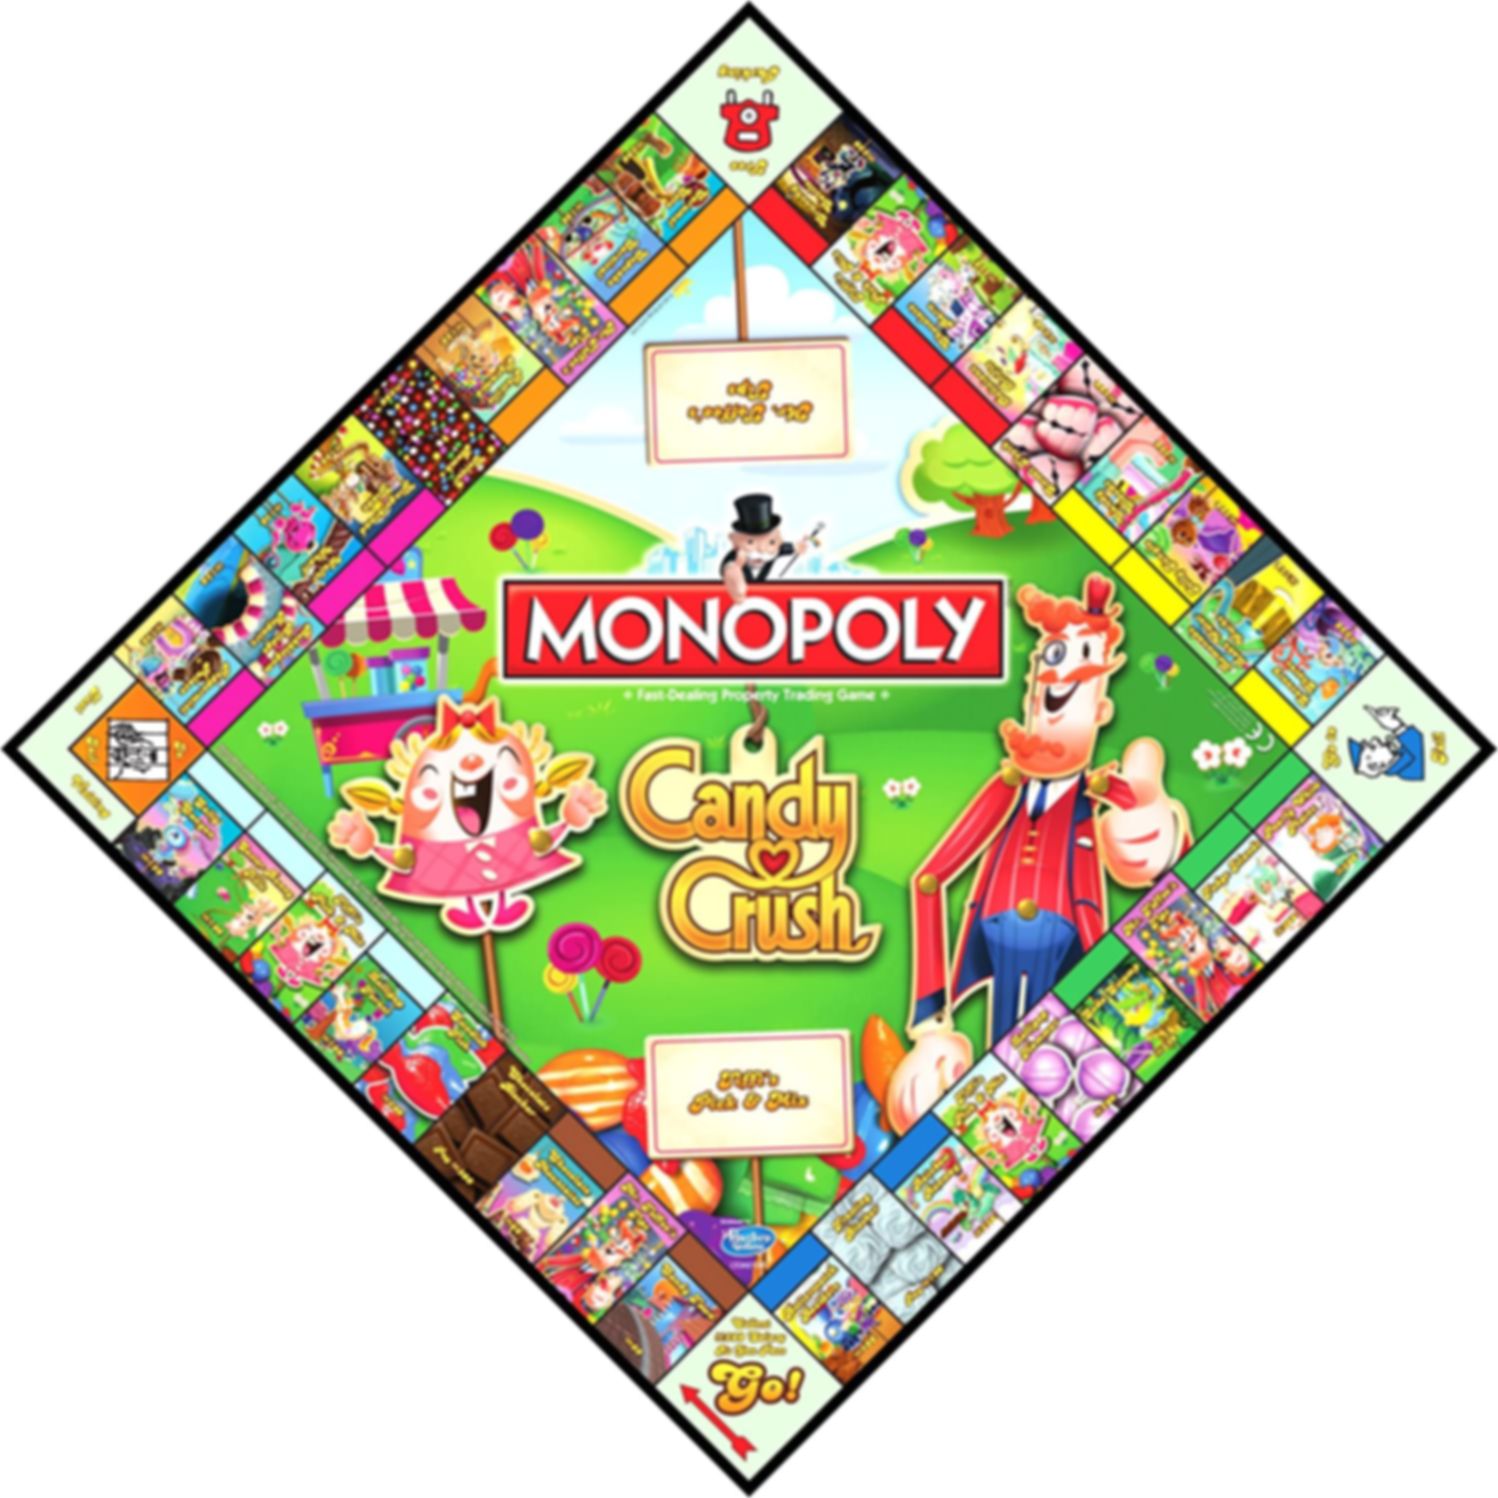 Monopoly Candy Crush game board